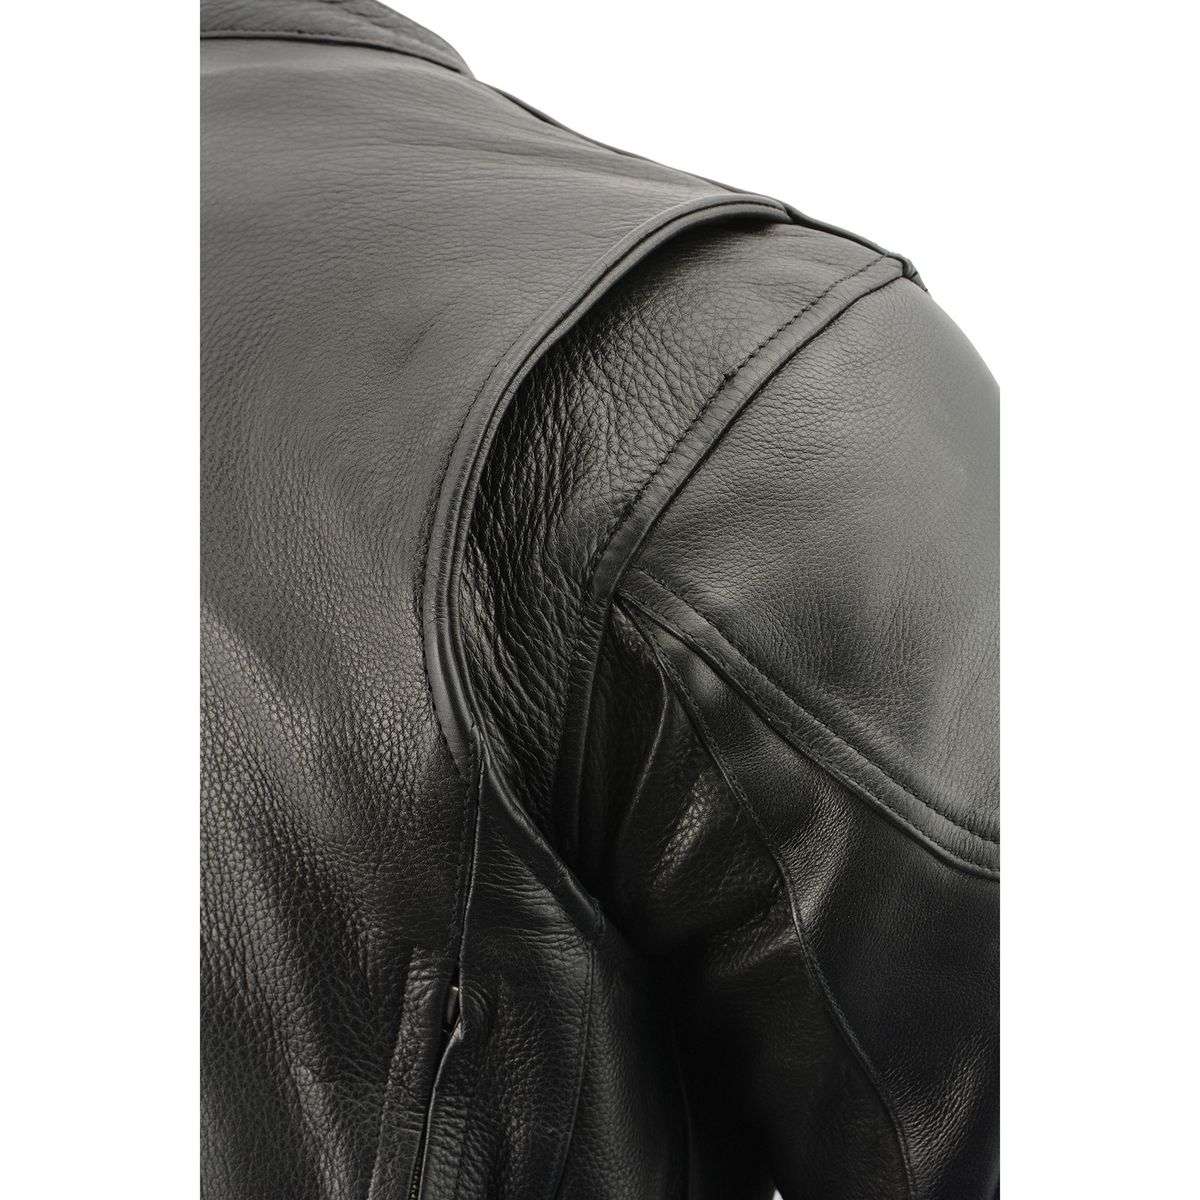 Men's 'Scooter' Black Vented Leather Jacket with Side Laces